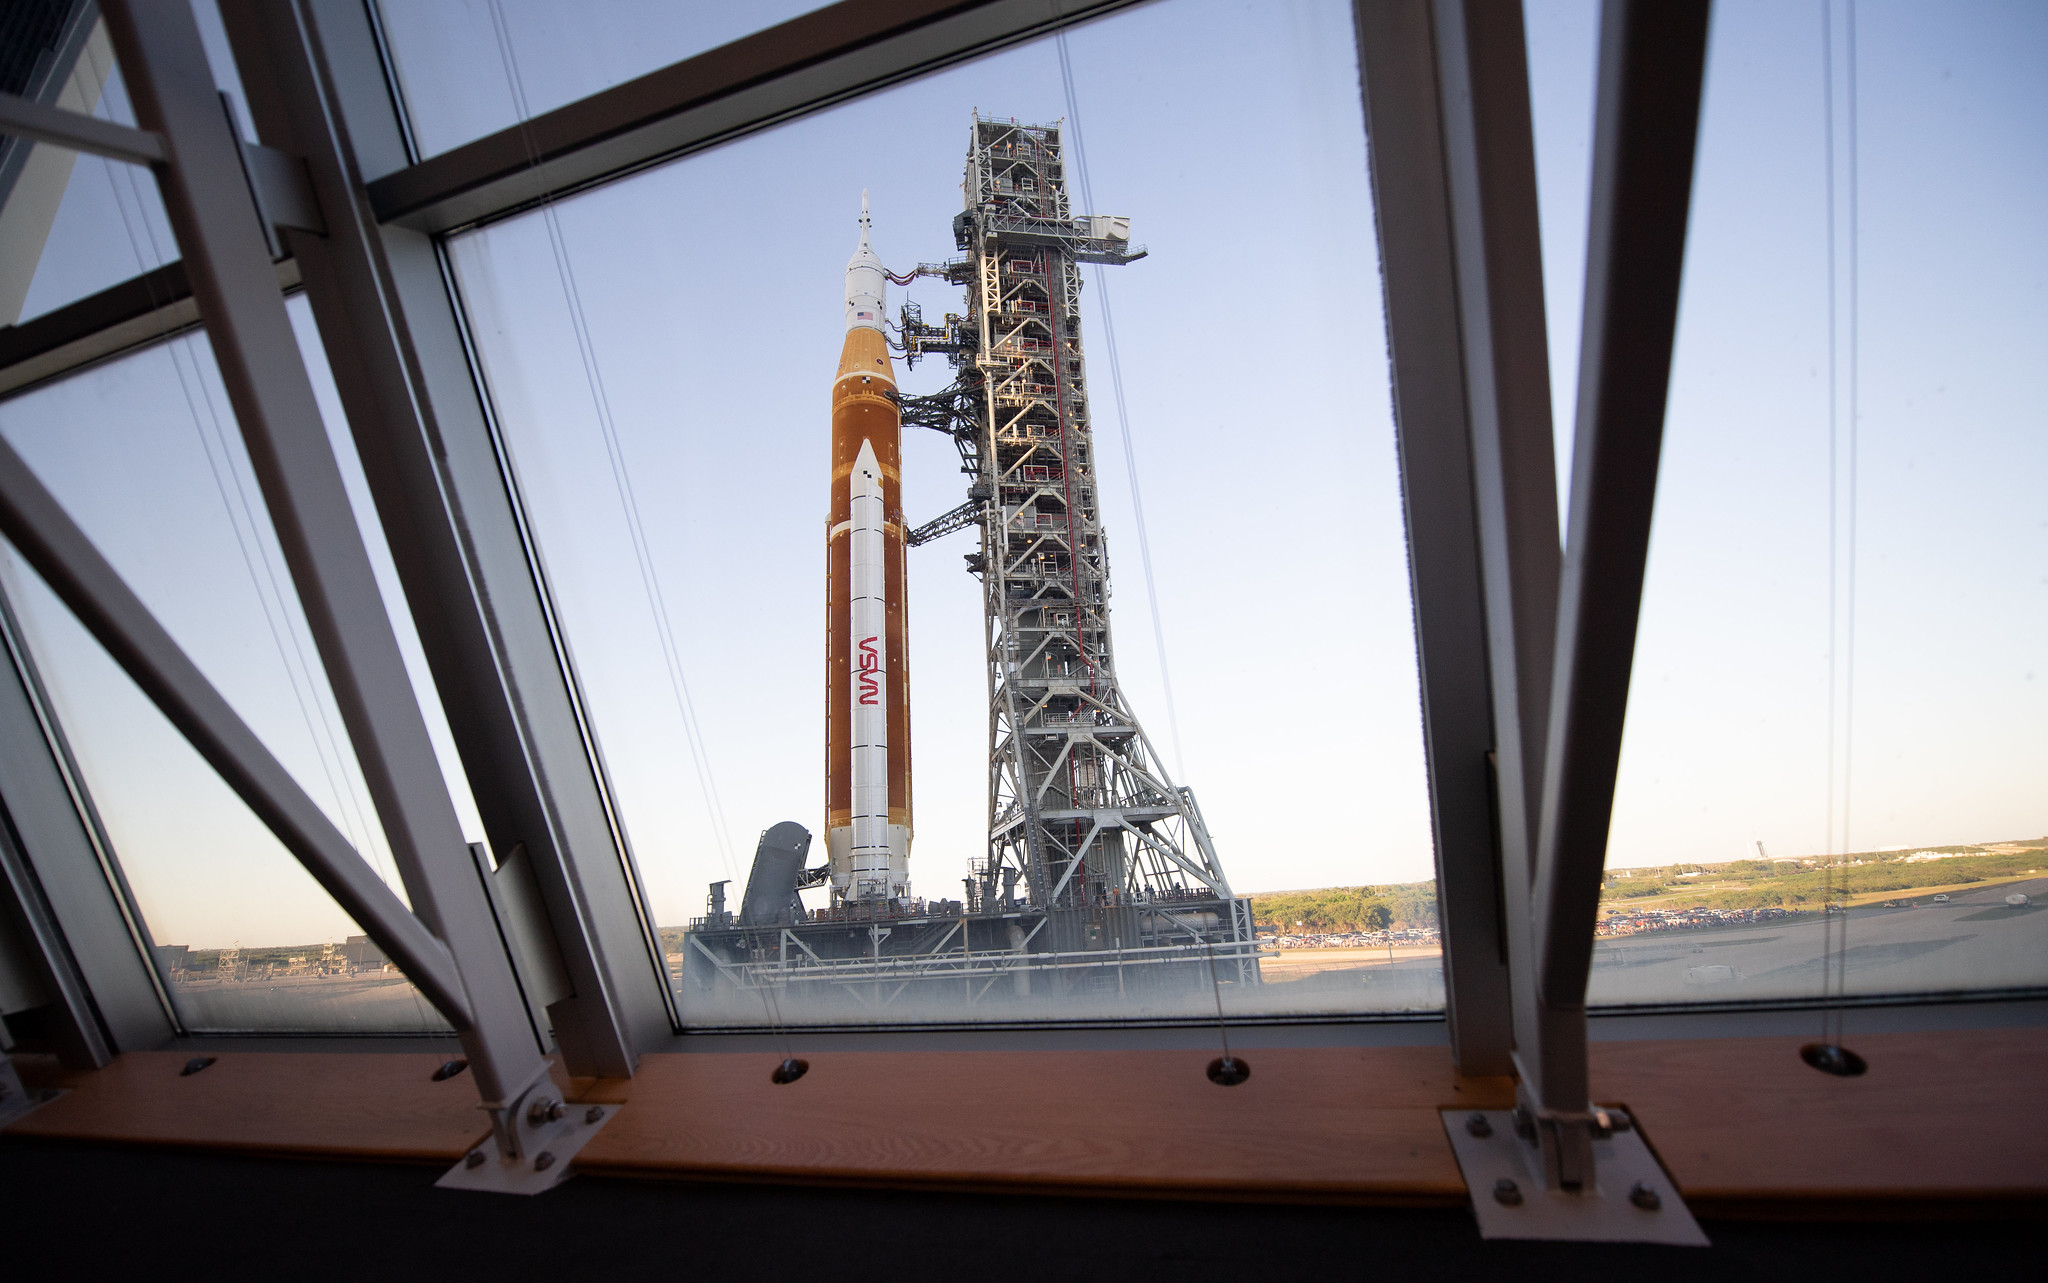 NASA’s Space Launch System (SLS) rocket with the Orion spacecraft aboard is seen through the windows of Firing Room One in the Rocco A. Petrone Launch Control Center atop a mobile launcher as it rolls out of High Bay 3 of the Vehicle Assembly Building for the first time to Launch Complex 39B, Thursday, March 17, 2022, at NASA’s Kennedy Space Center in Florida.